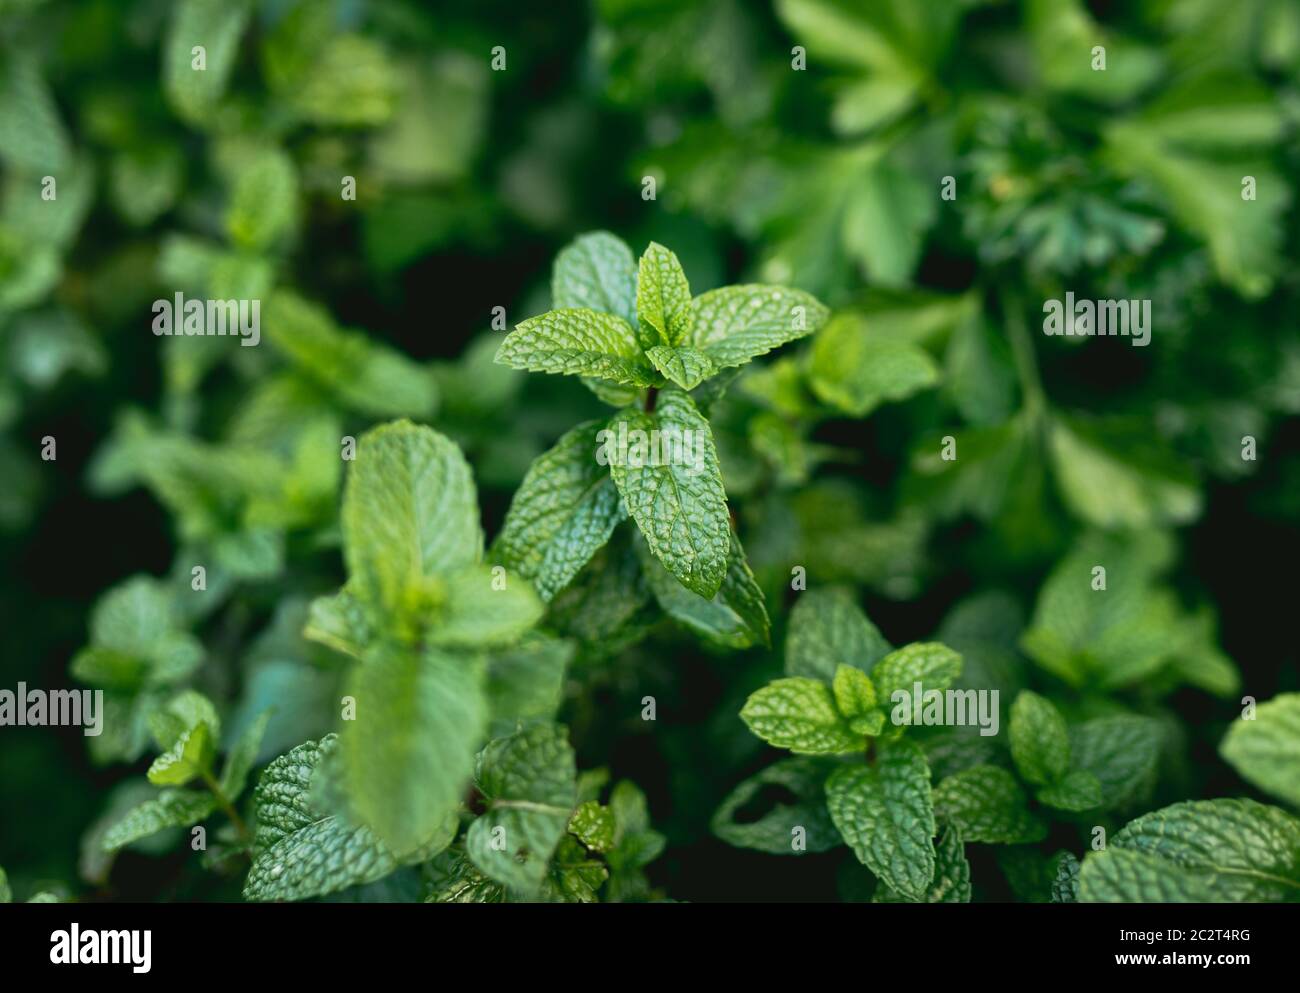 Mint in Homemade Herb Garden Bed Stock Photo